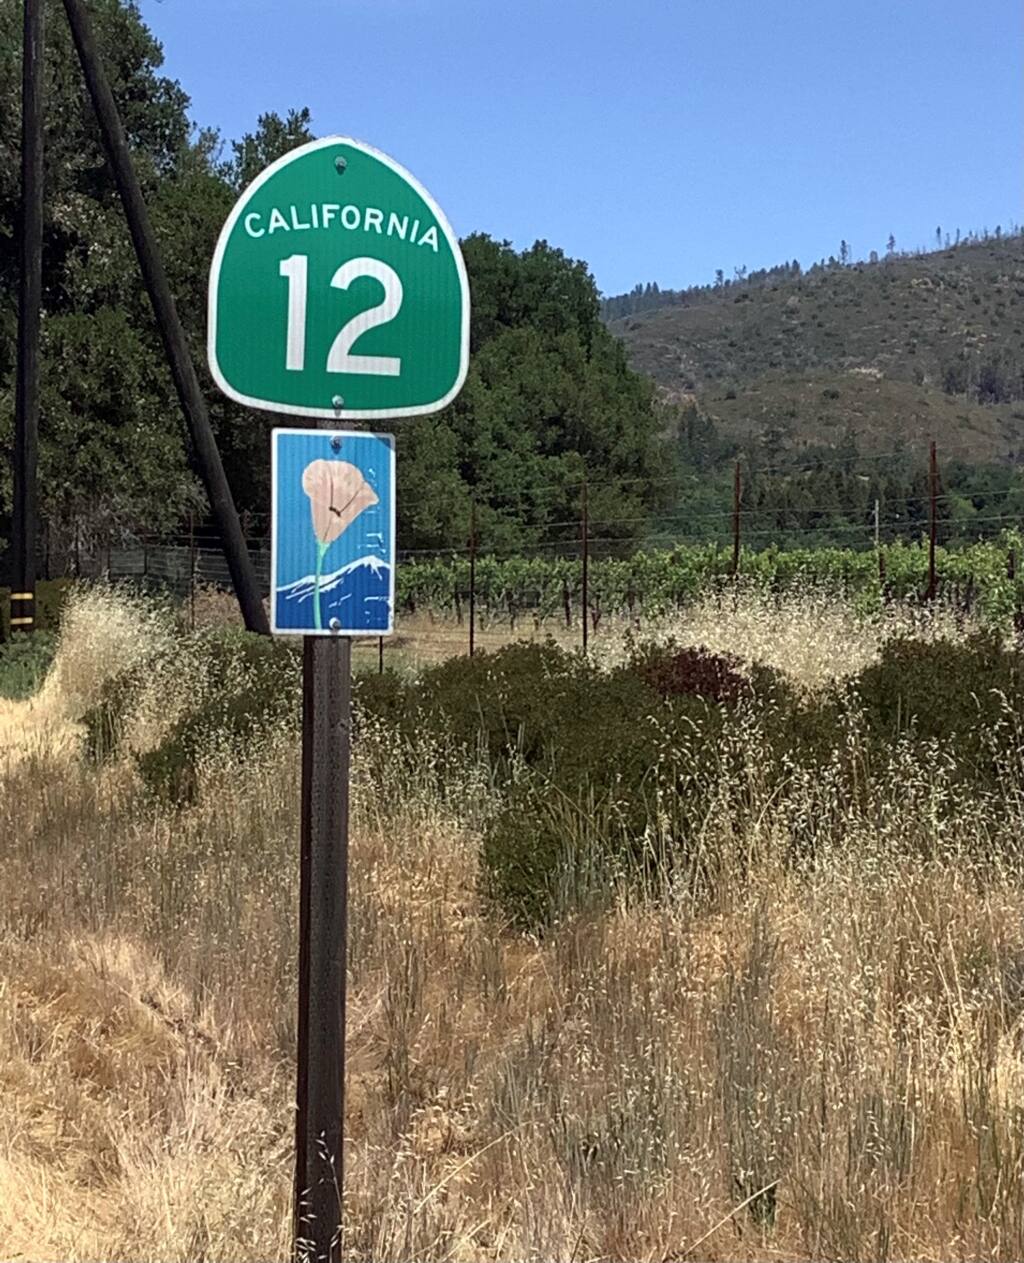 The state designated Highway 12 as a ’California Scenic Highway,’ one of the first.